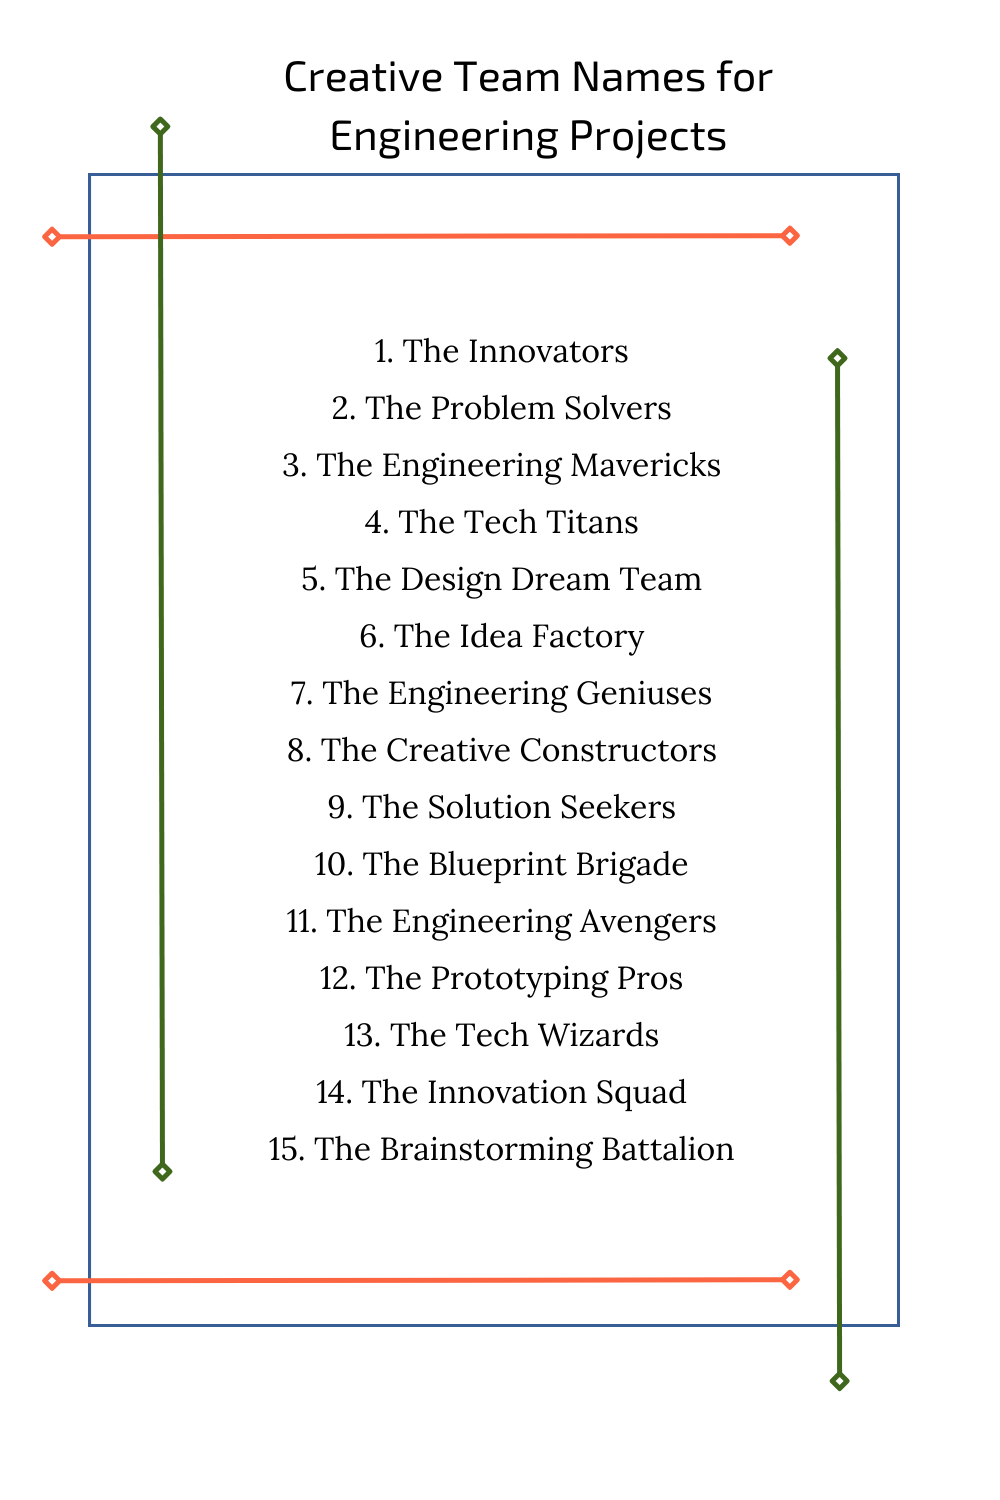 Creative Team Names for Engineering Projects